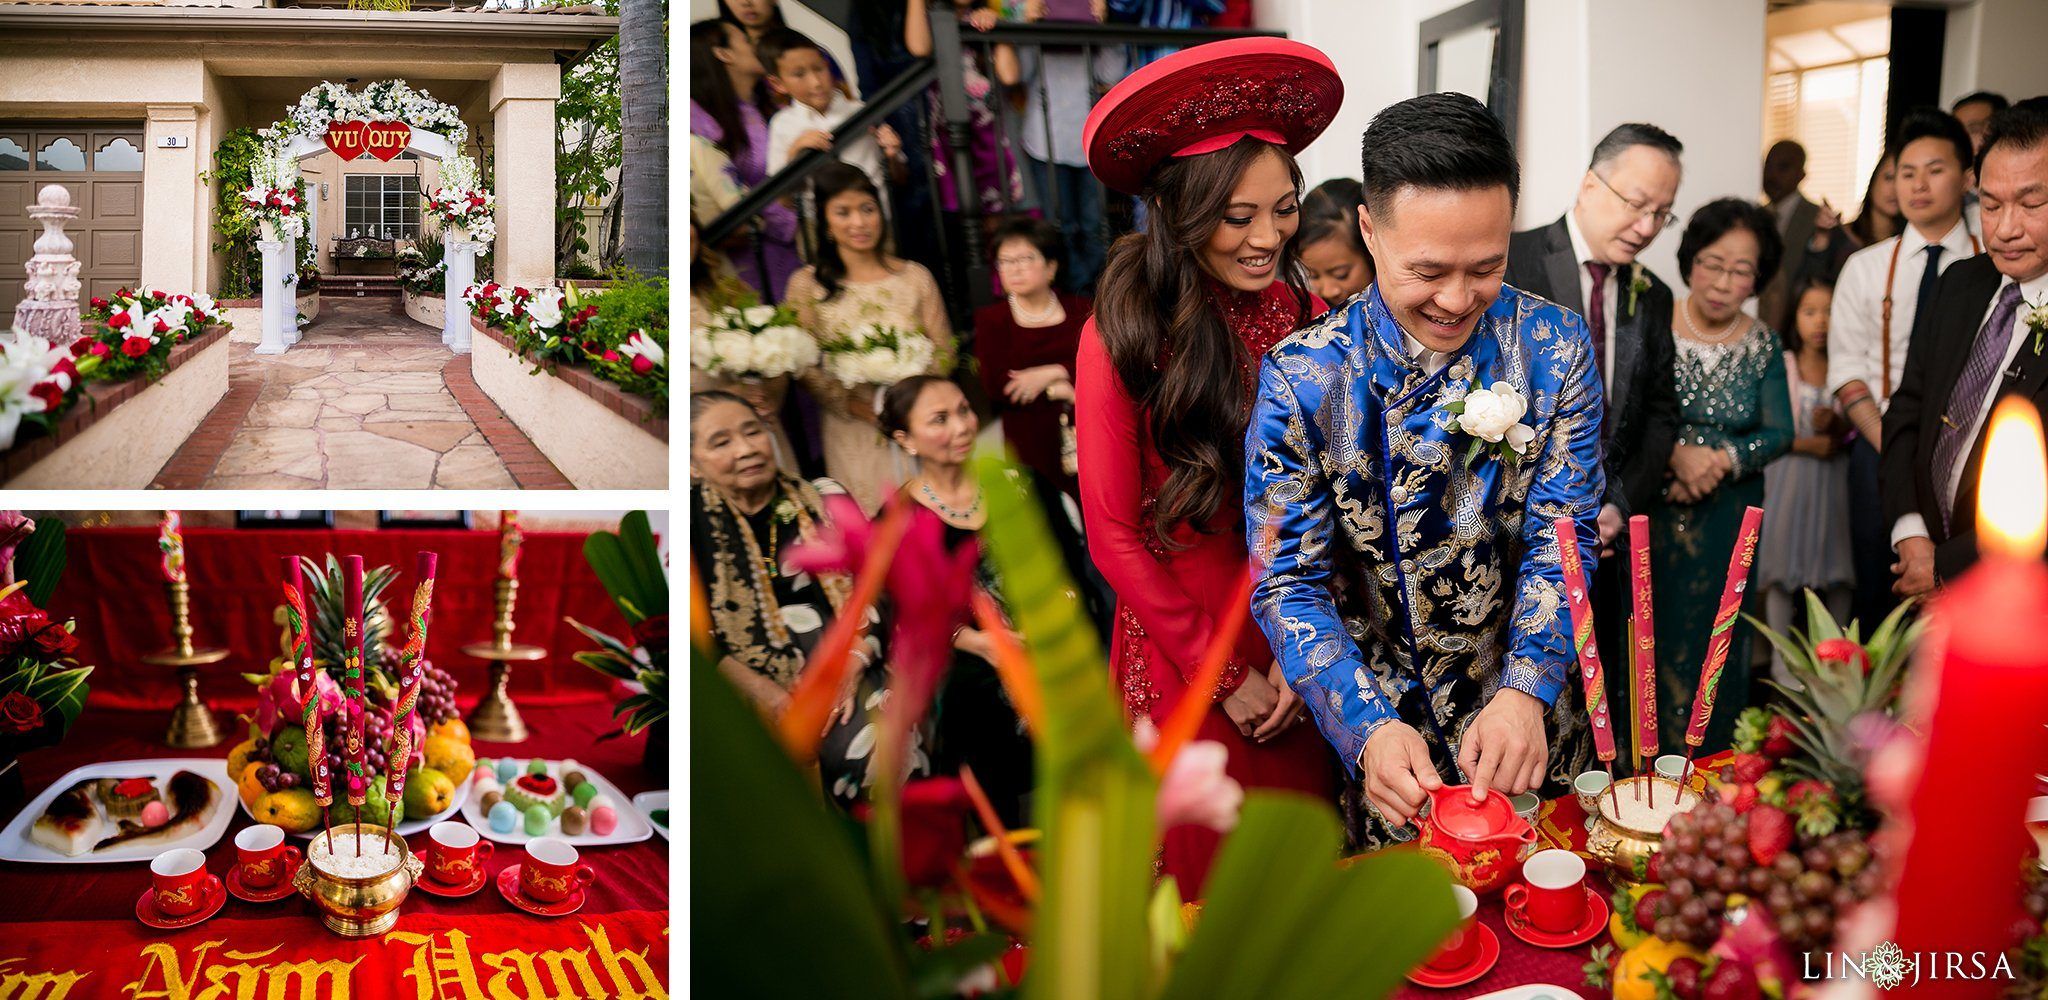 best of Marriage in culture traditions Asian